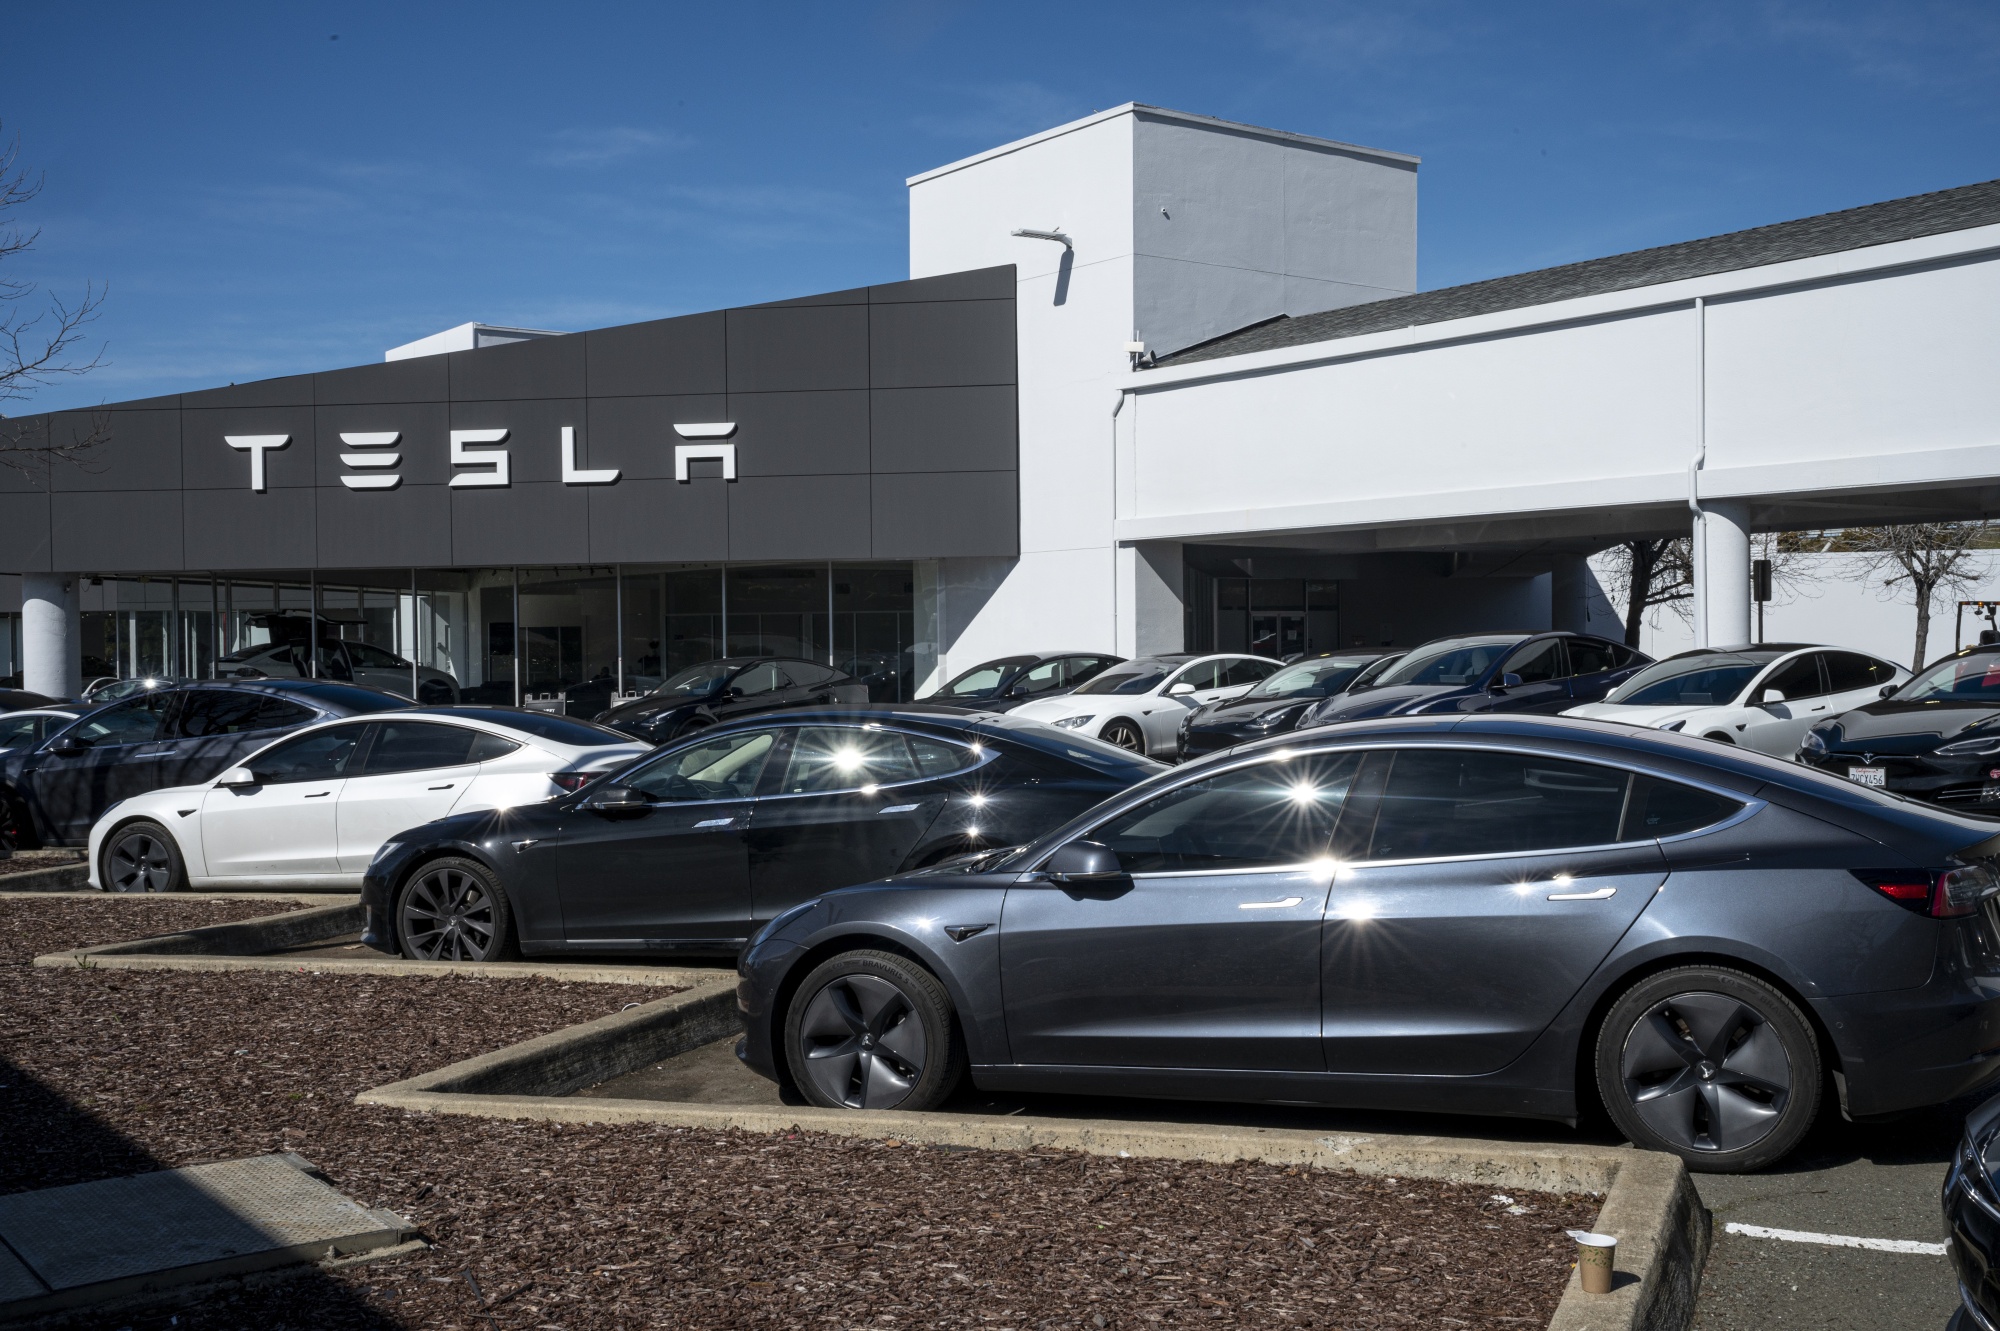 Tesla Cuts Prices Sharply as It Moves to Bolster Demand - The New York Times